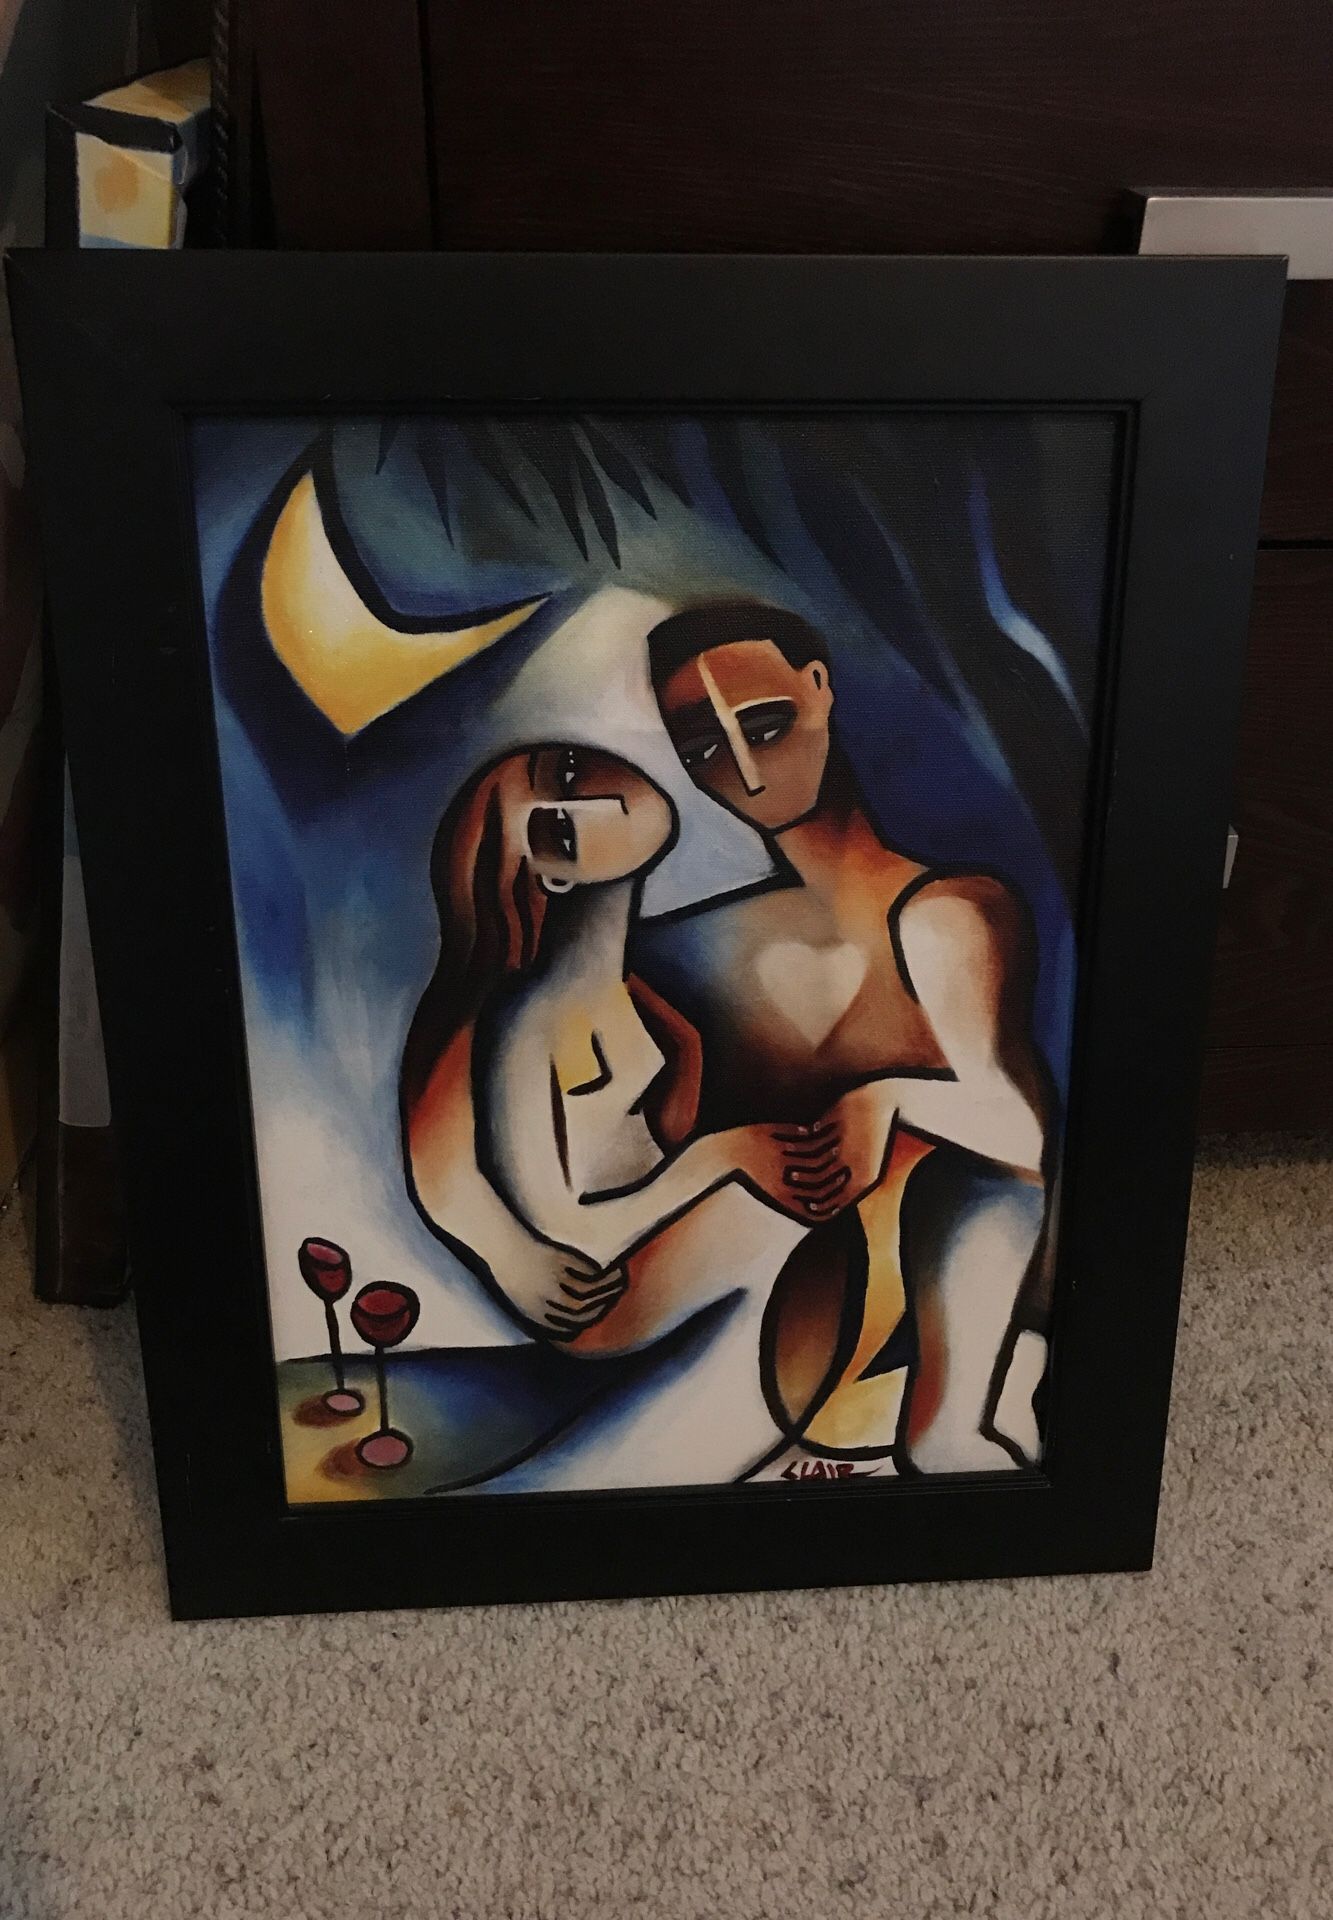 19 inch by 15 inch framed fine art oil painted canvas